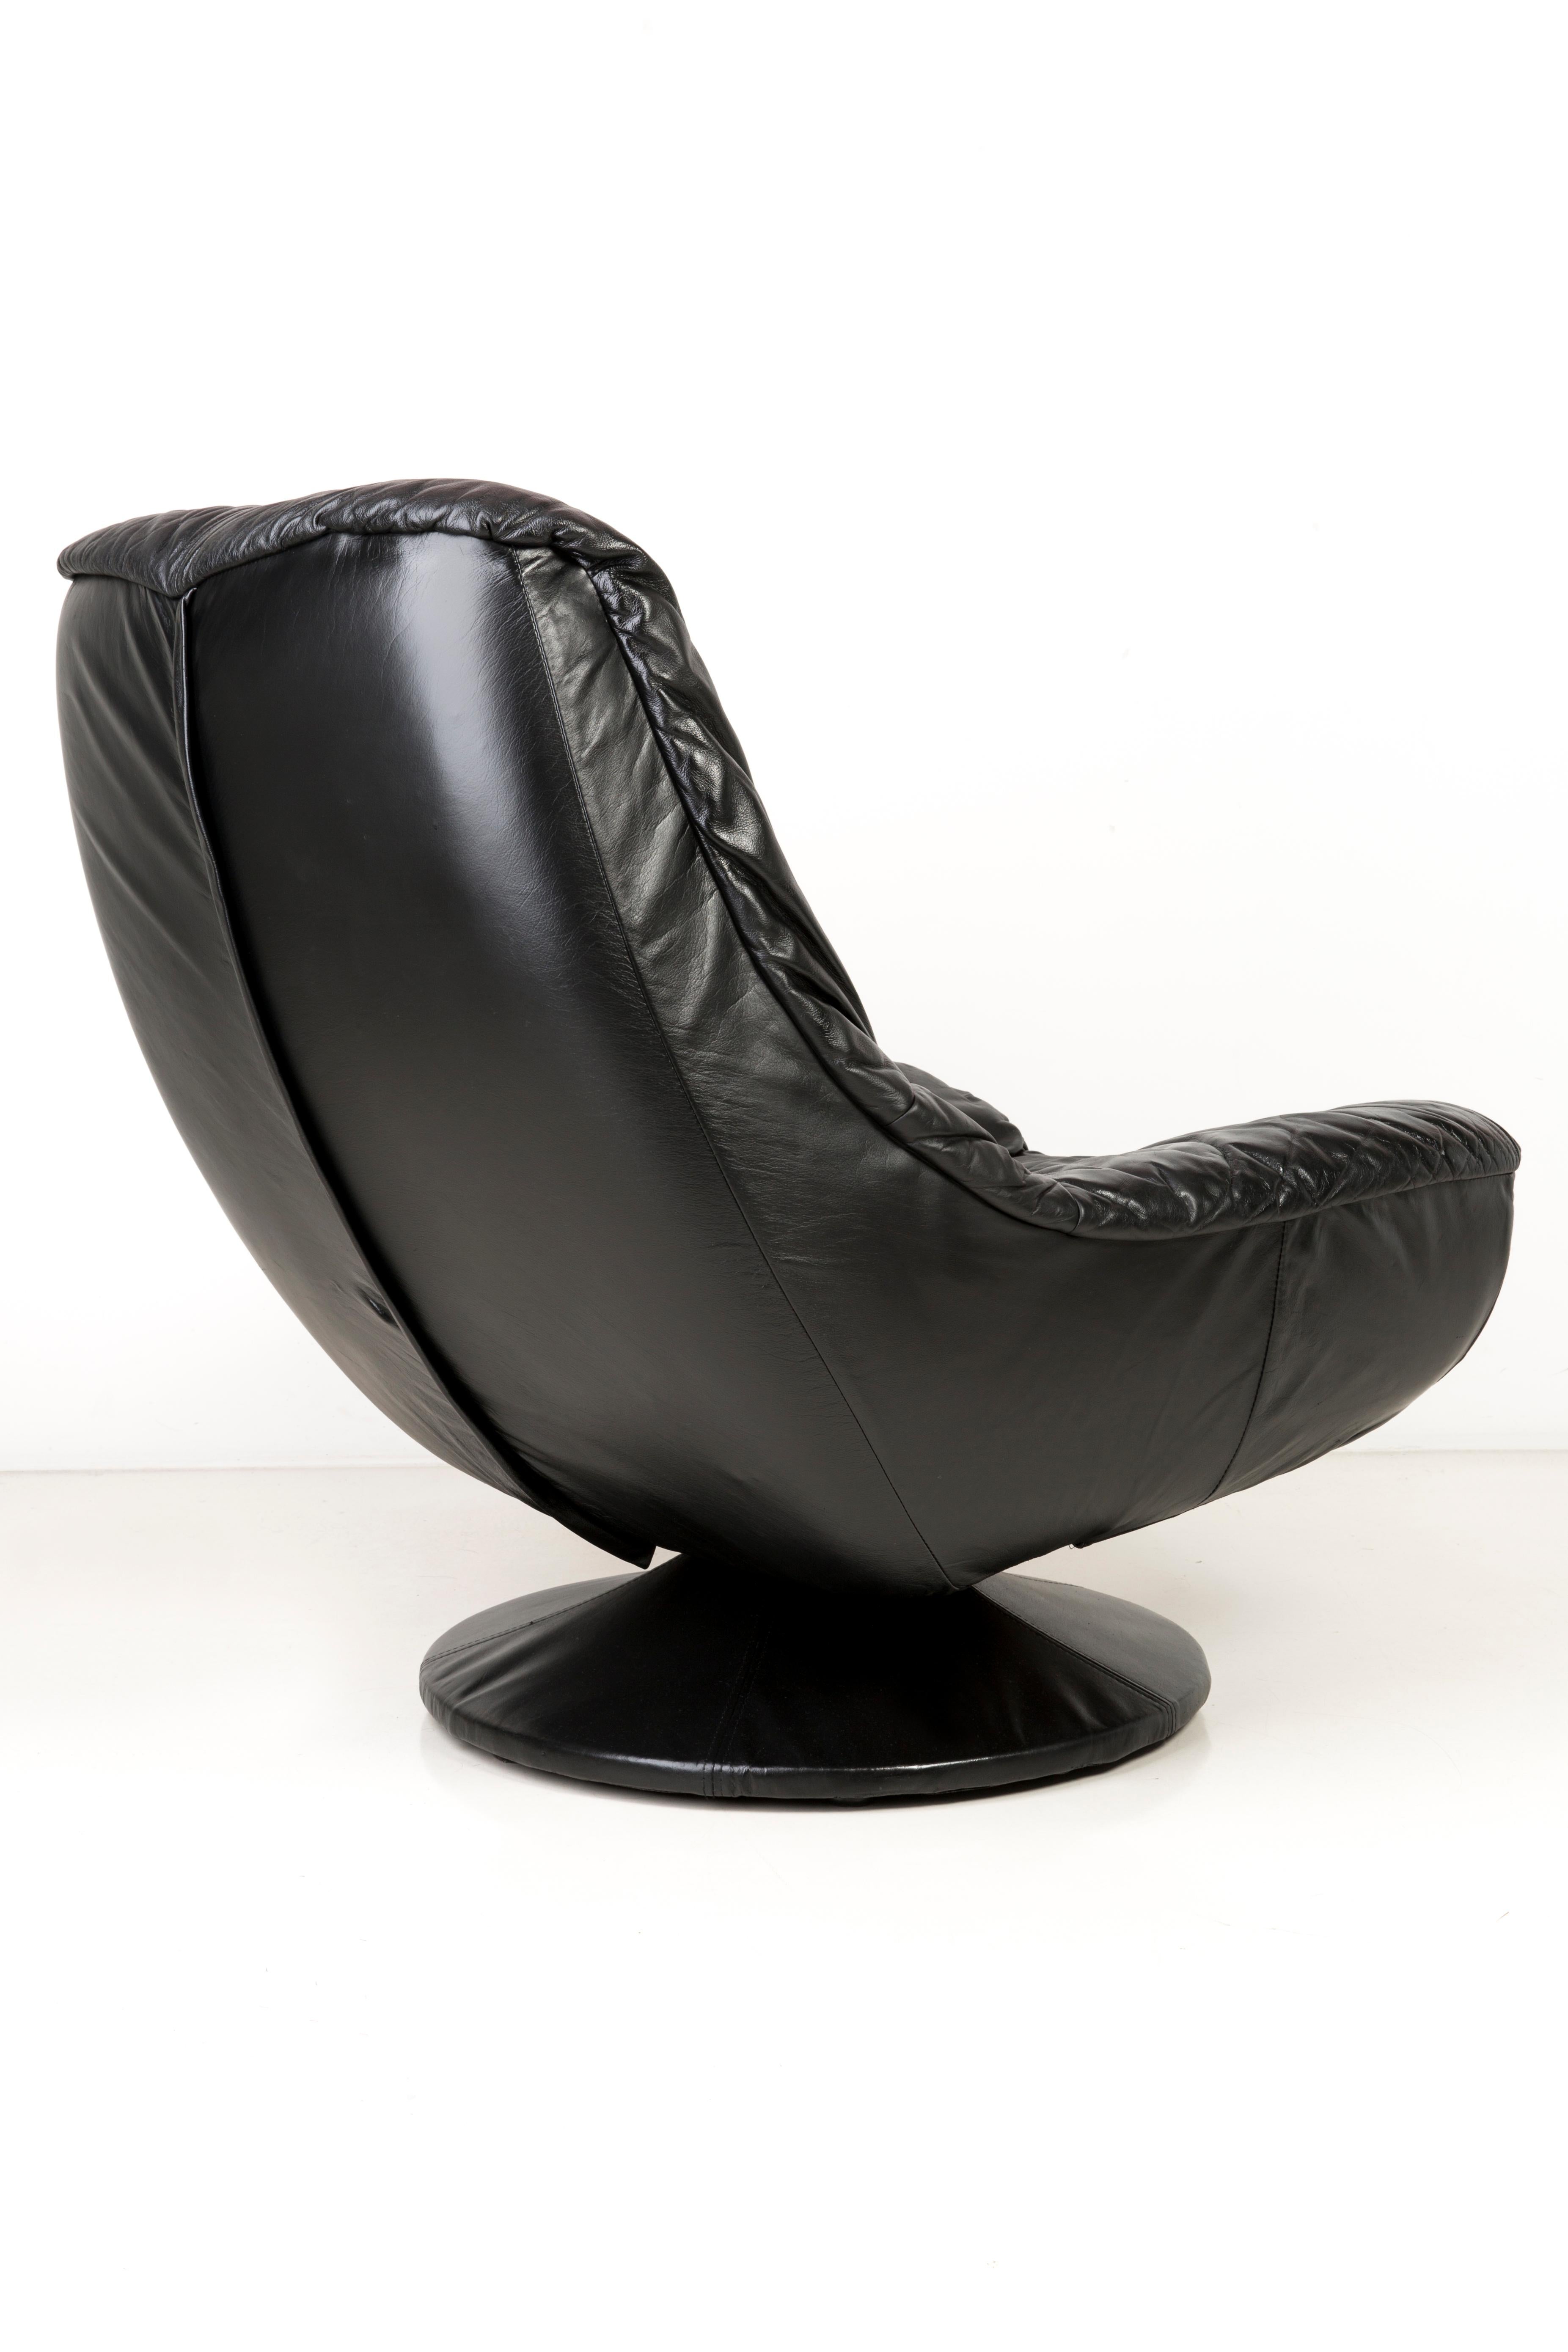 black leather swivel chairs